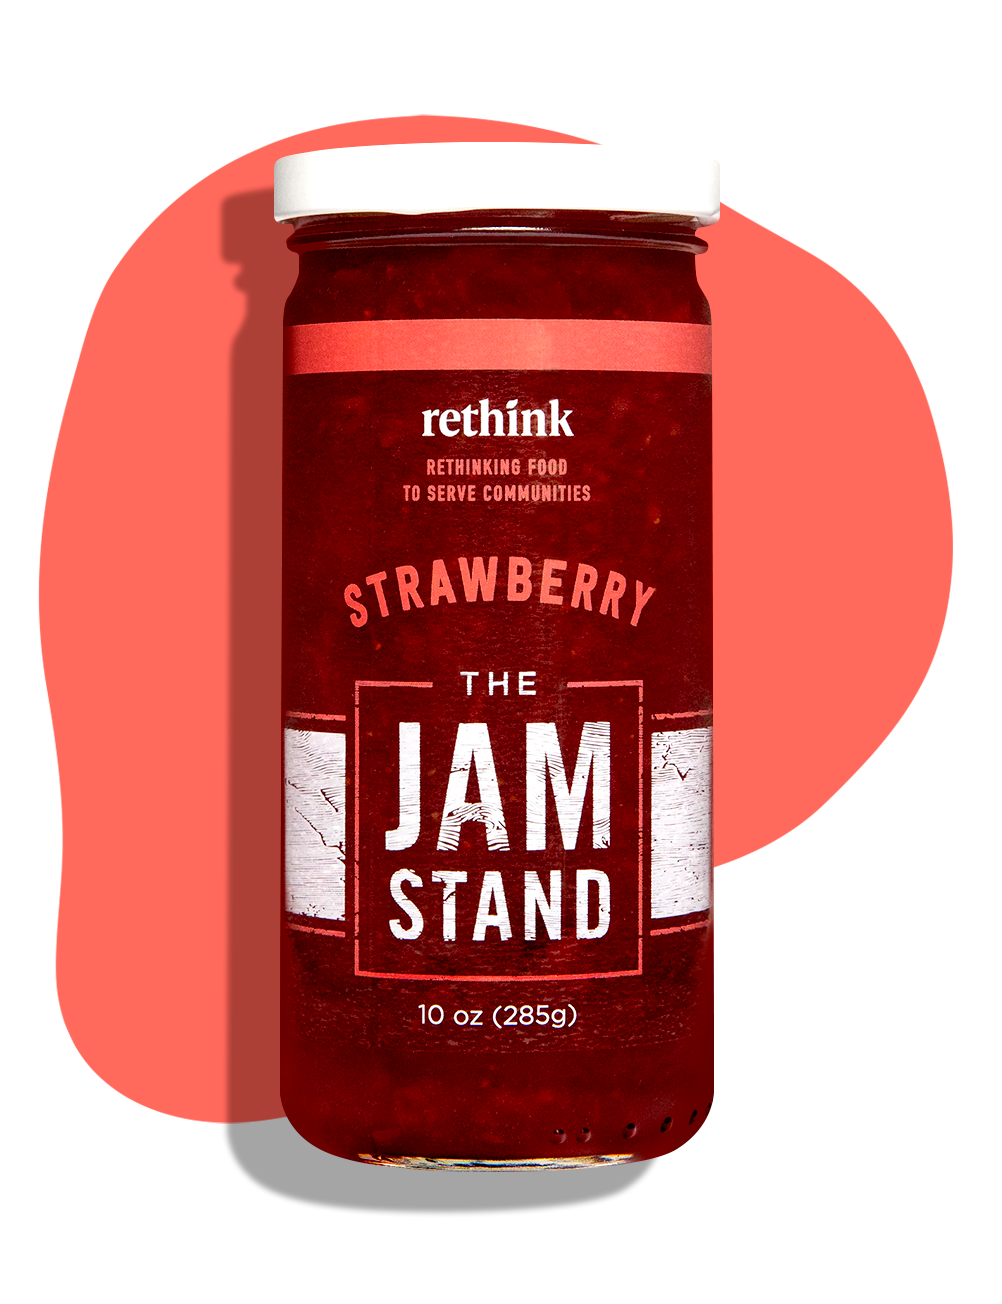 Jam Stand business collaboration with Rethink